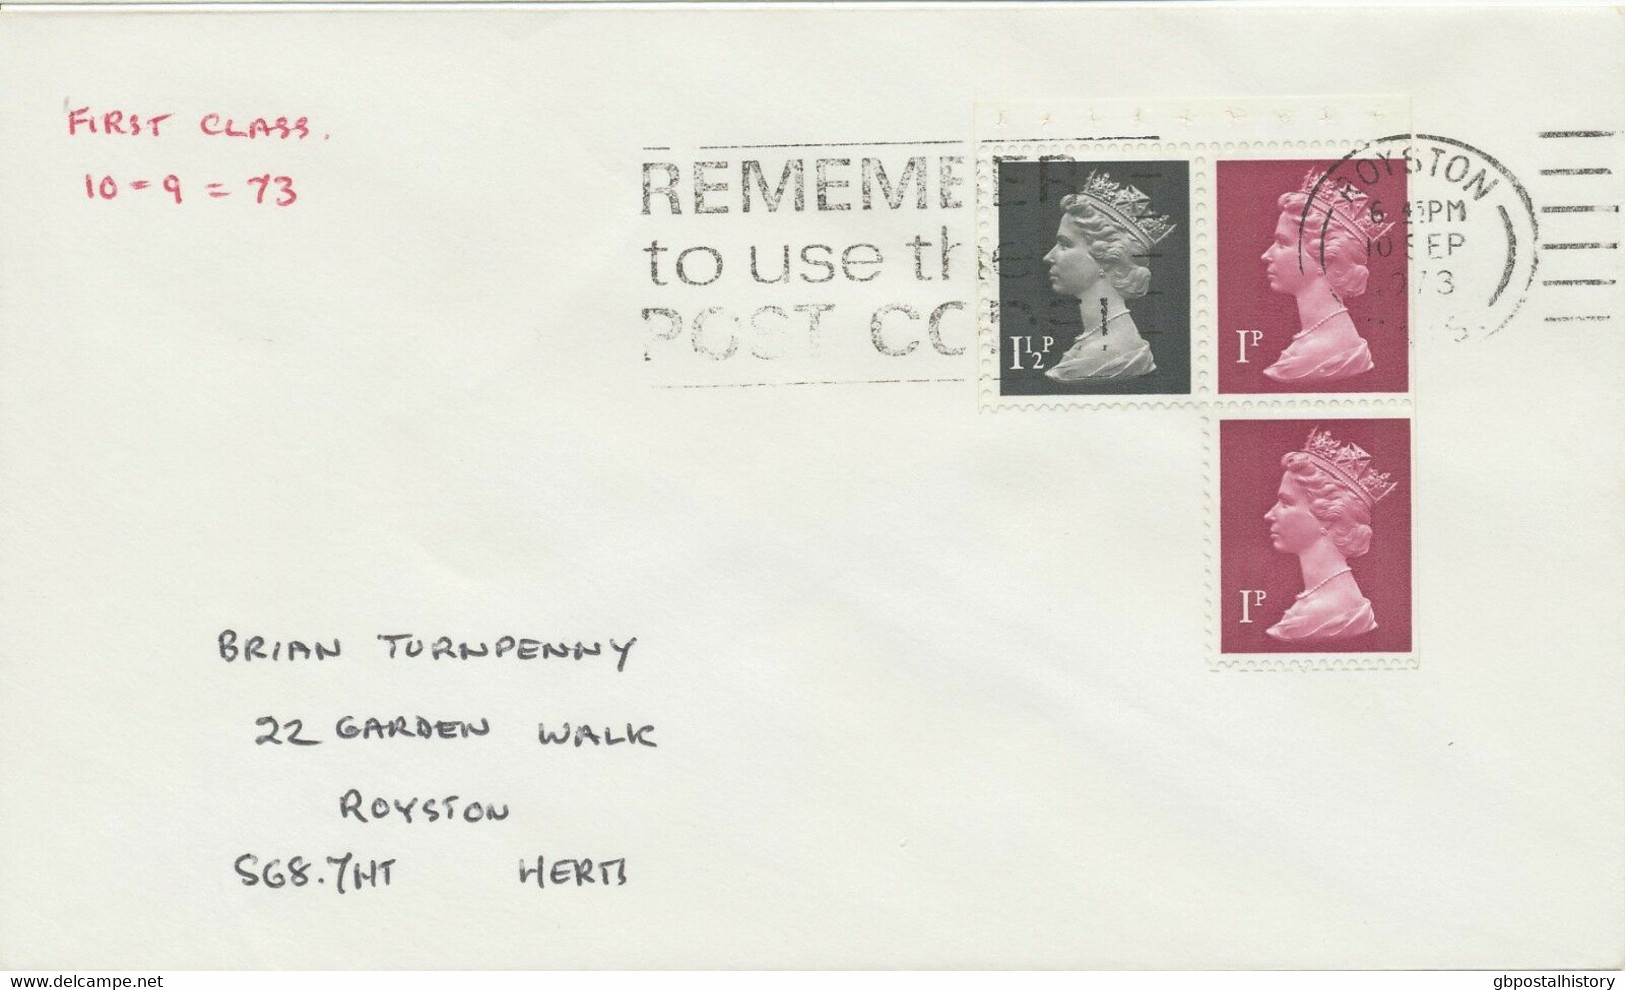 GB 1973 Machin 1 1/2P+1P+1P First Day Cover New Postage Rate 3 1/2P 1stCl - Machins